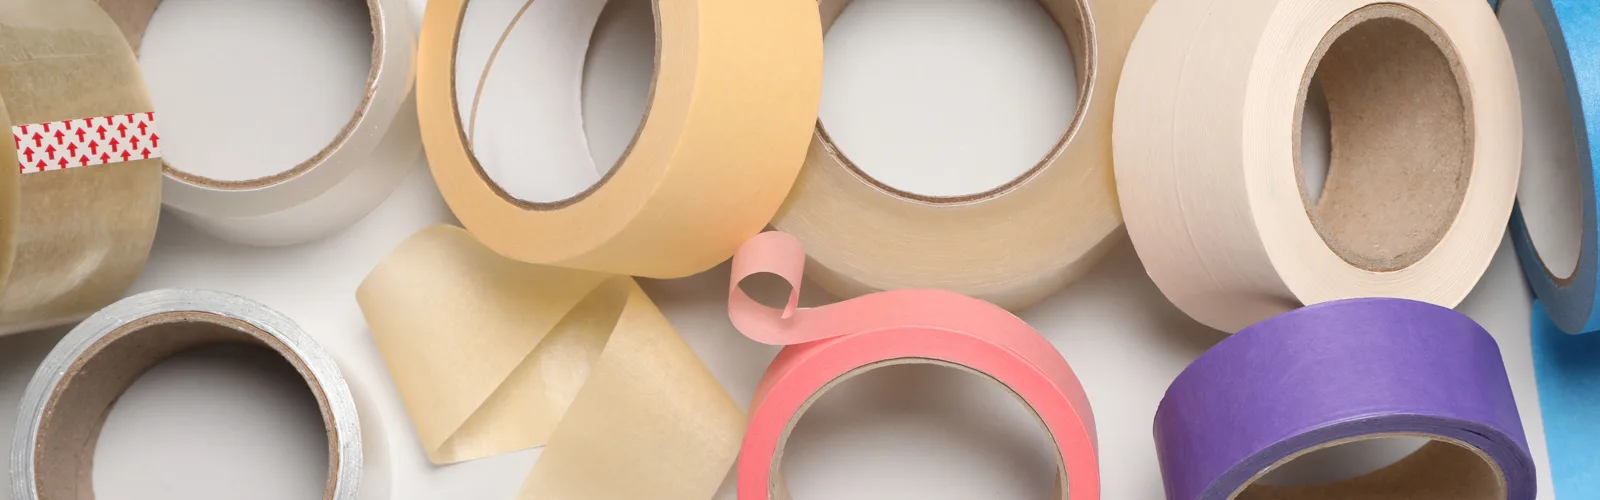 Best Painter's Tape: How to Choose the Best Type for Your Project